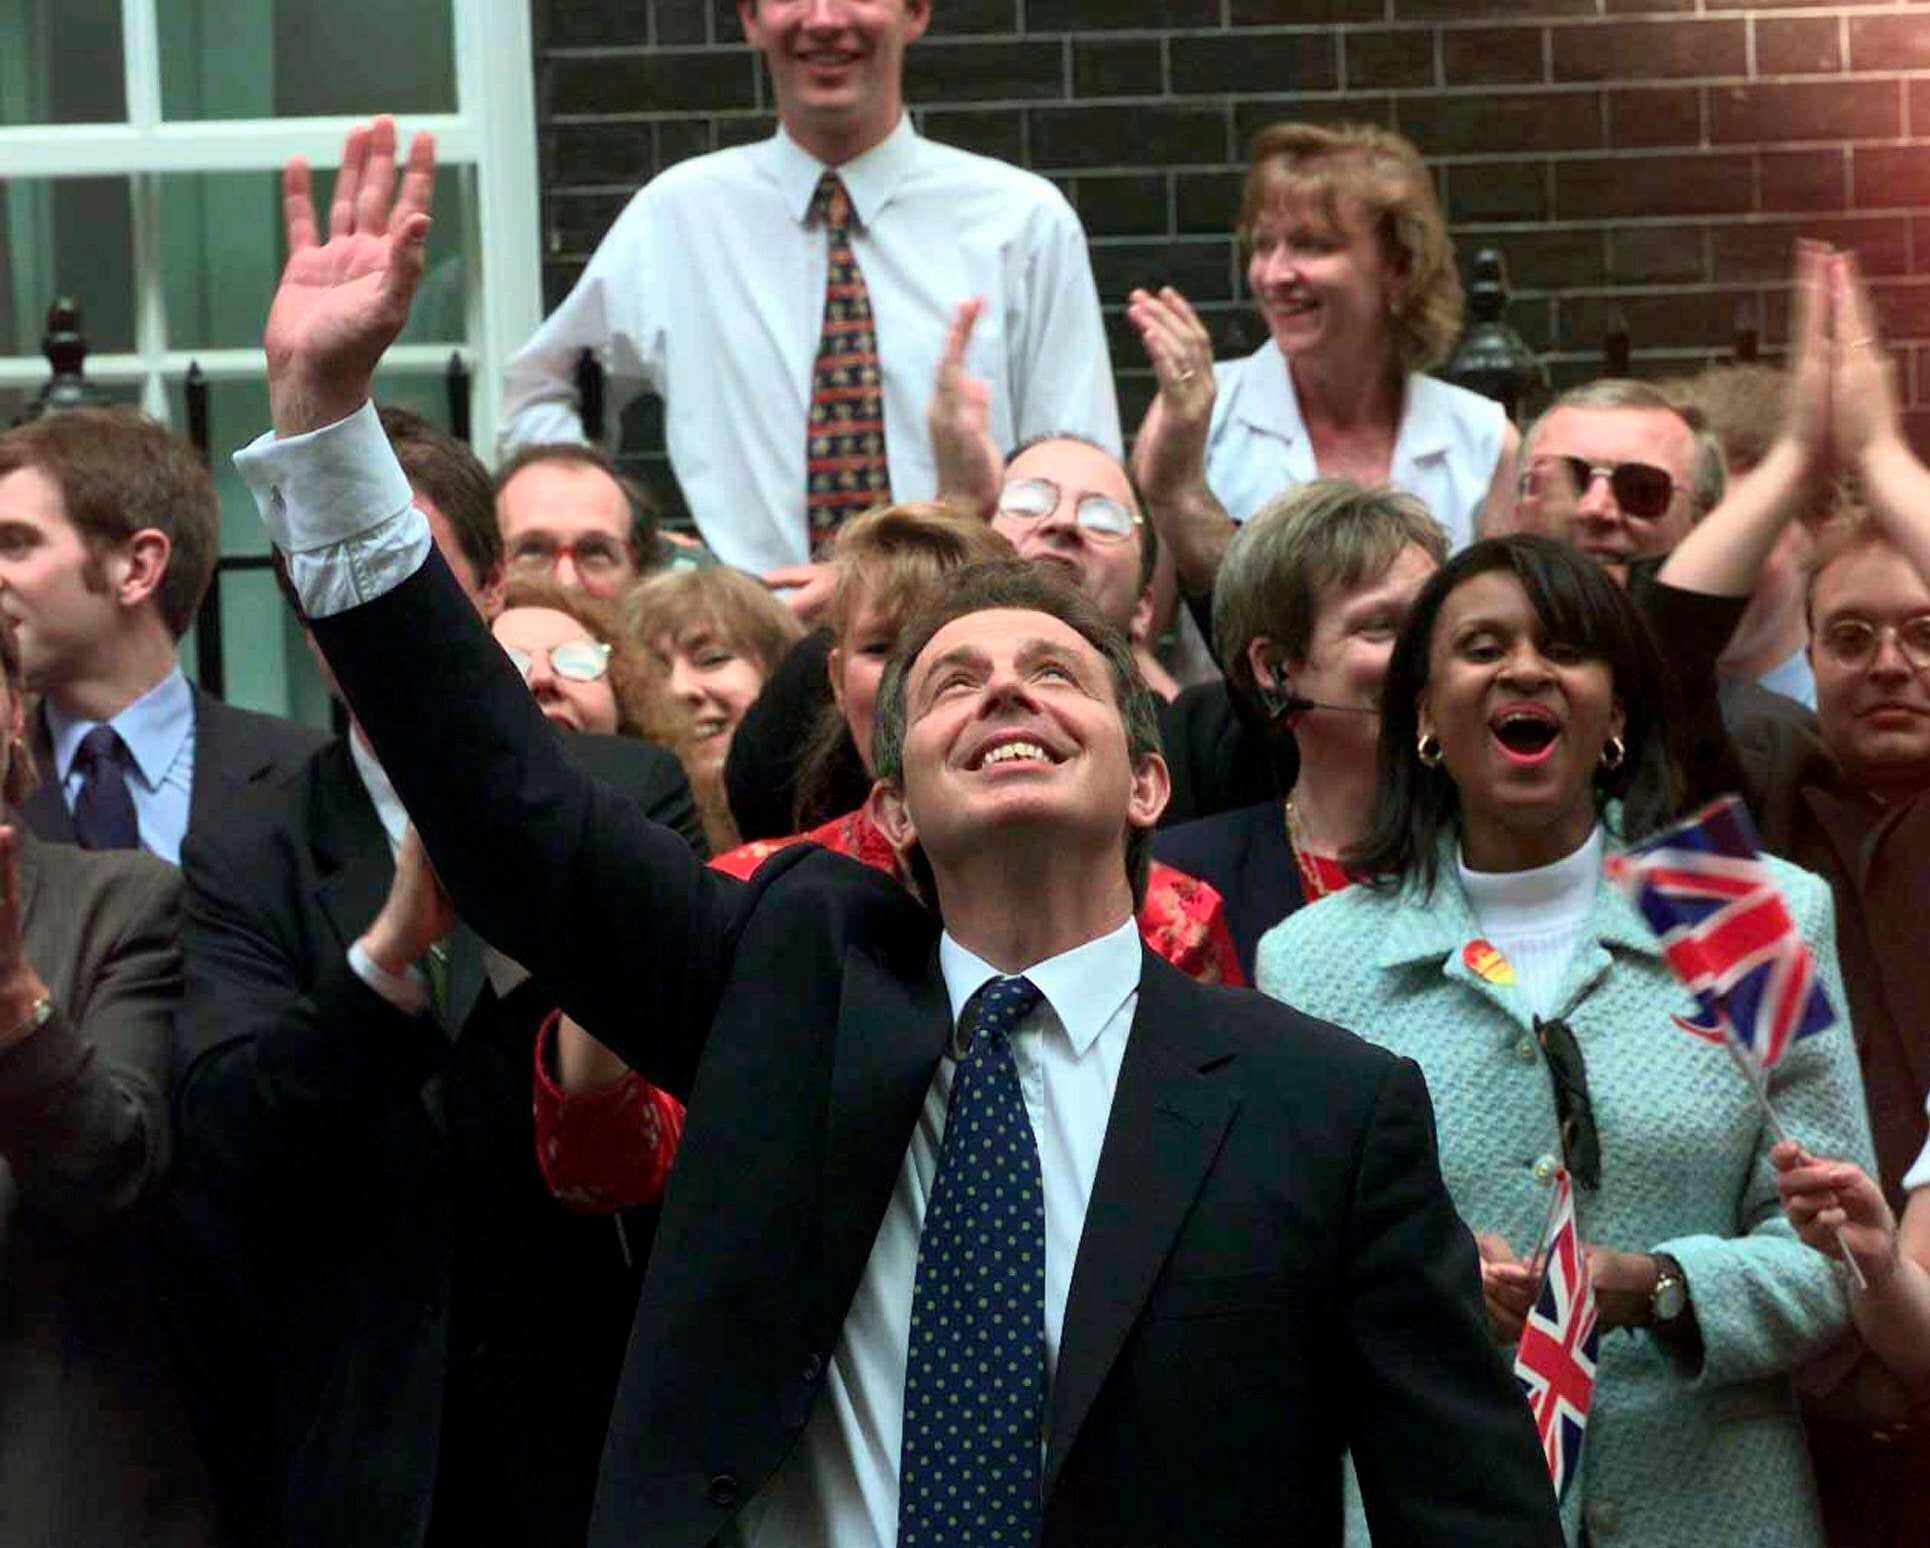 Prime Minister Tony Blair, waves to well wishers in Downing Street, London, May 2, 1997